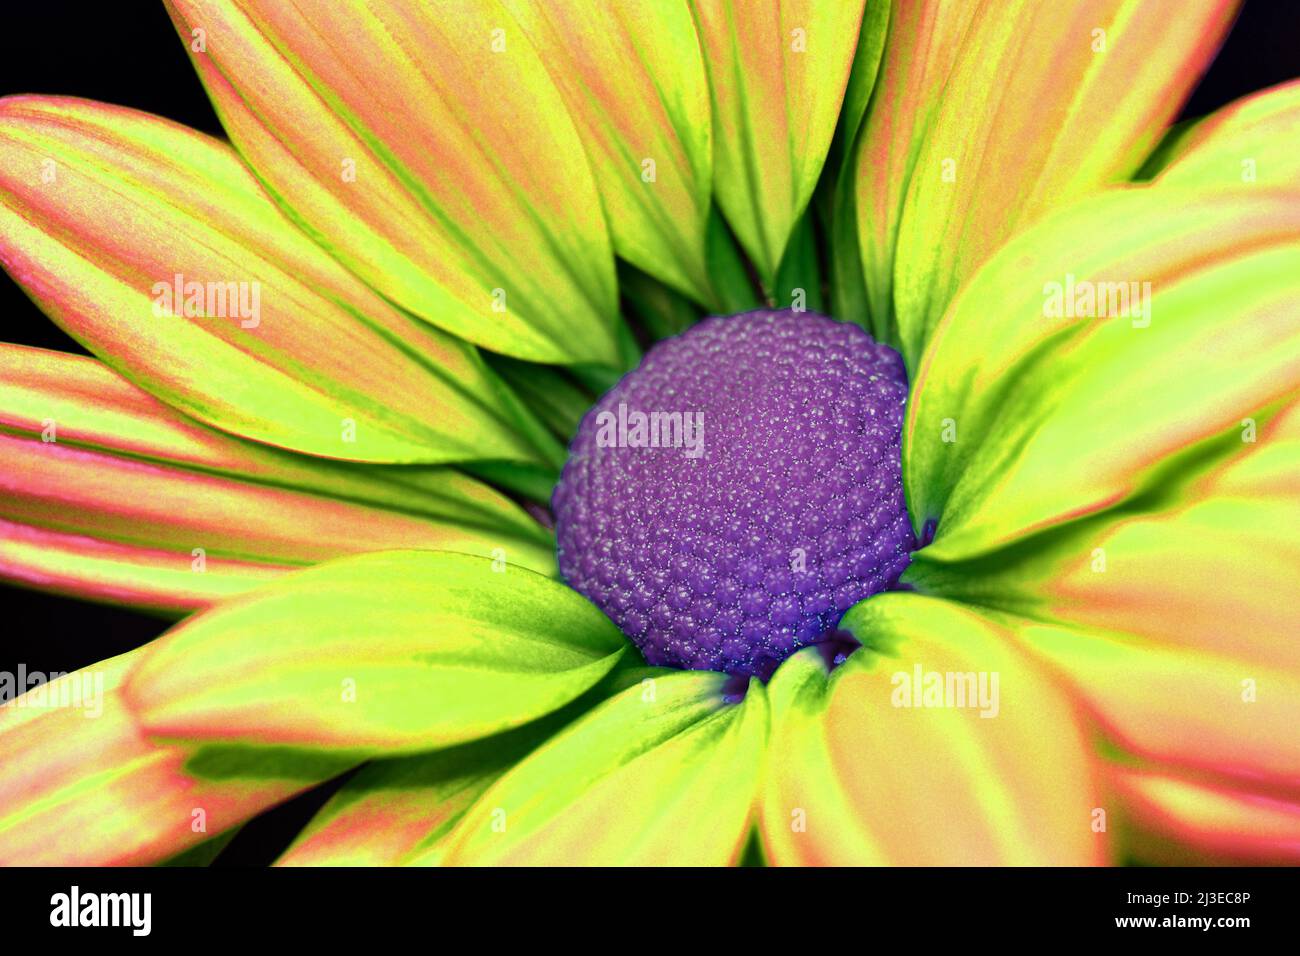 An extreme close-up of a psychedelic looking Chrysanthemum -Asteraceae family- flower with orange, green, yellowish petals and a purple centre Stock Photo